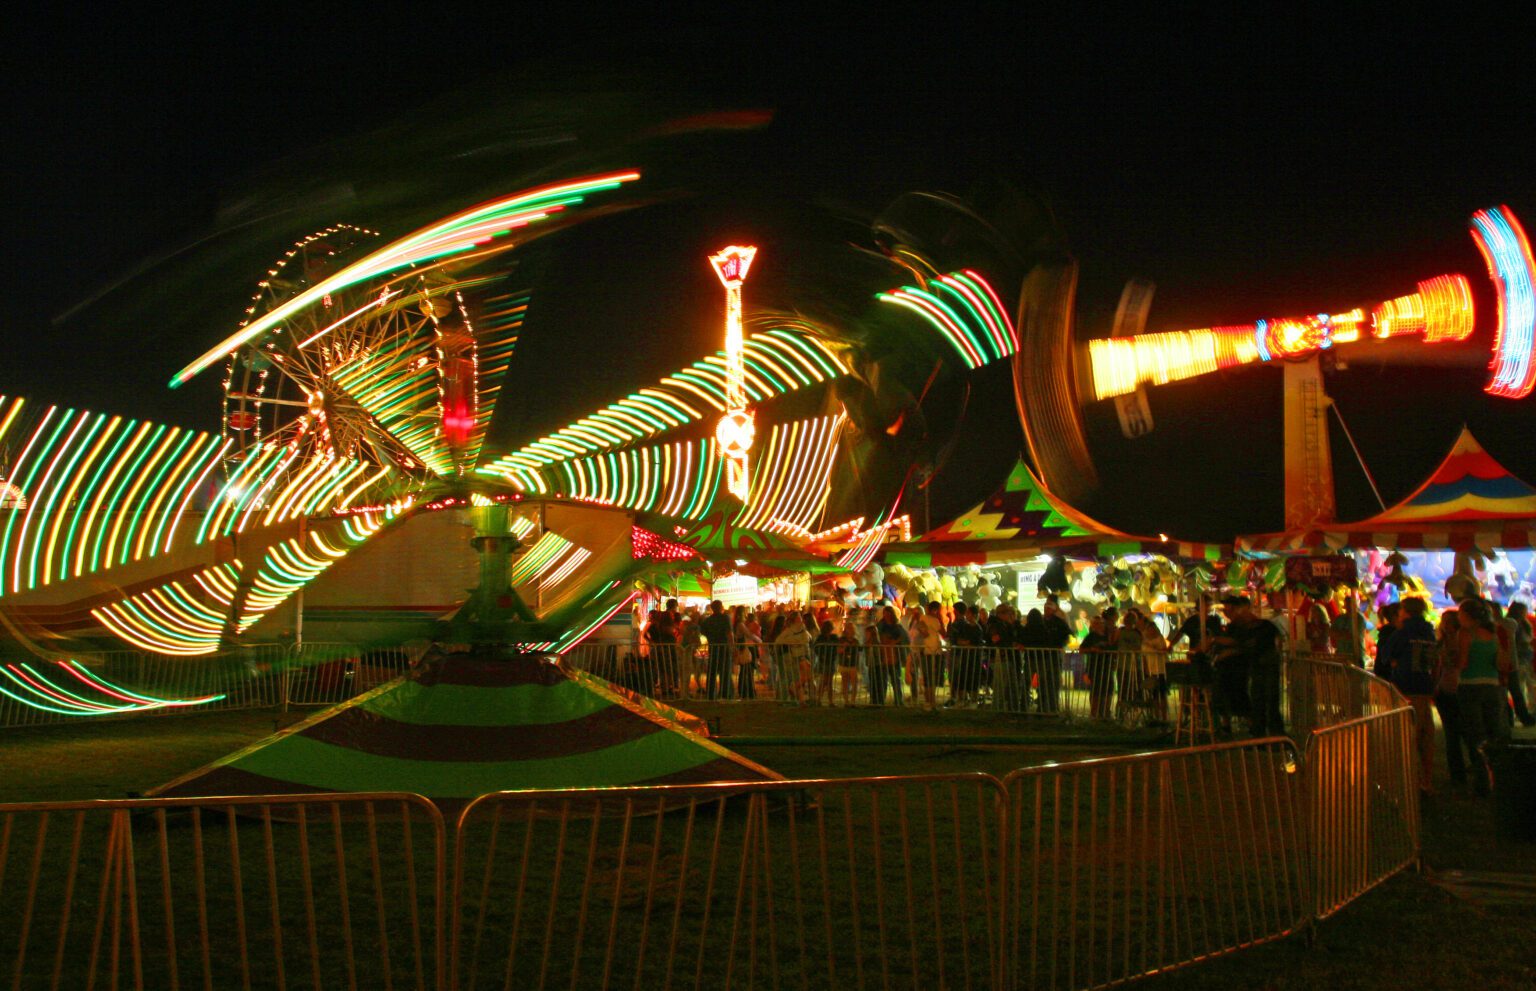 The midway at the Northwest Washington Fair in Lynden is a popular nighttime gathering spot for thrill-seeking carnival ride fans